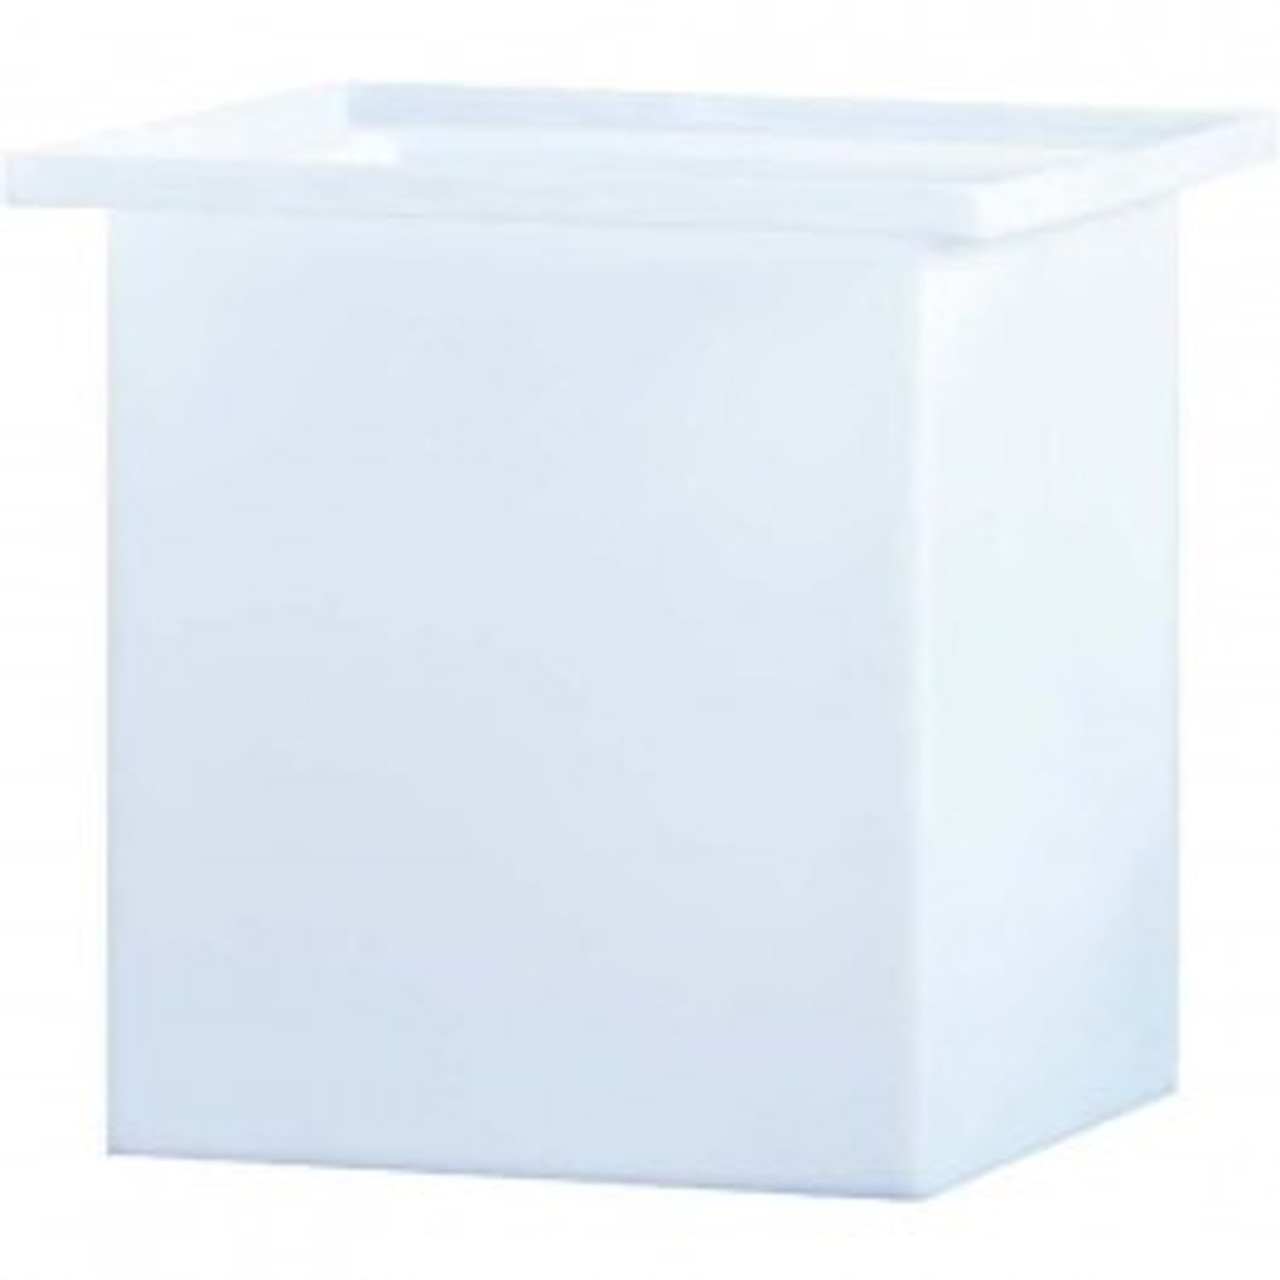 An image of a 3 Gallon PE Chem-Tainer White Rectangular Open Top Tank | R12X612A